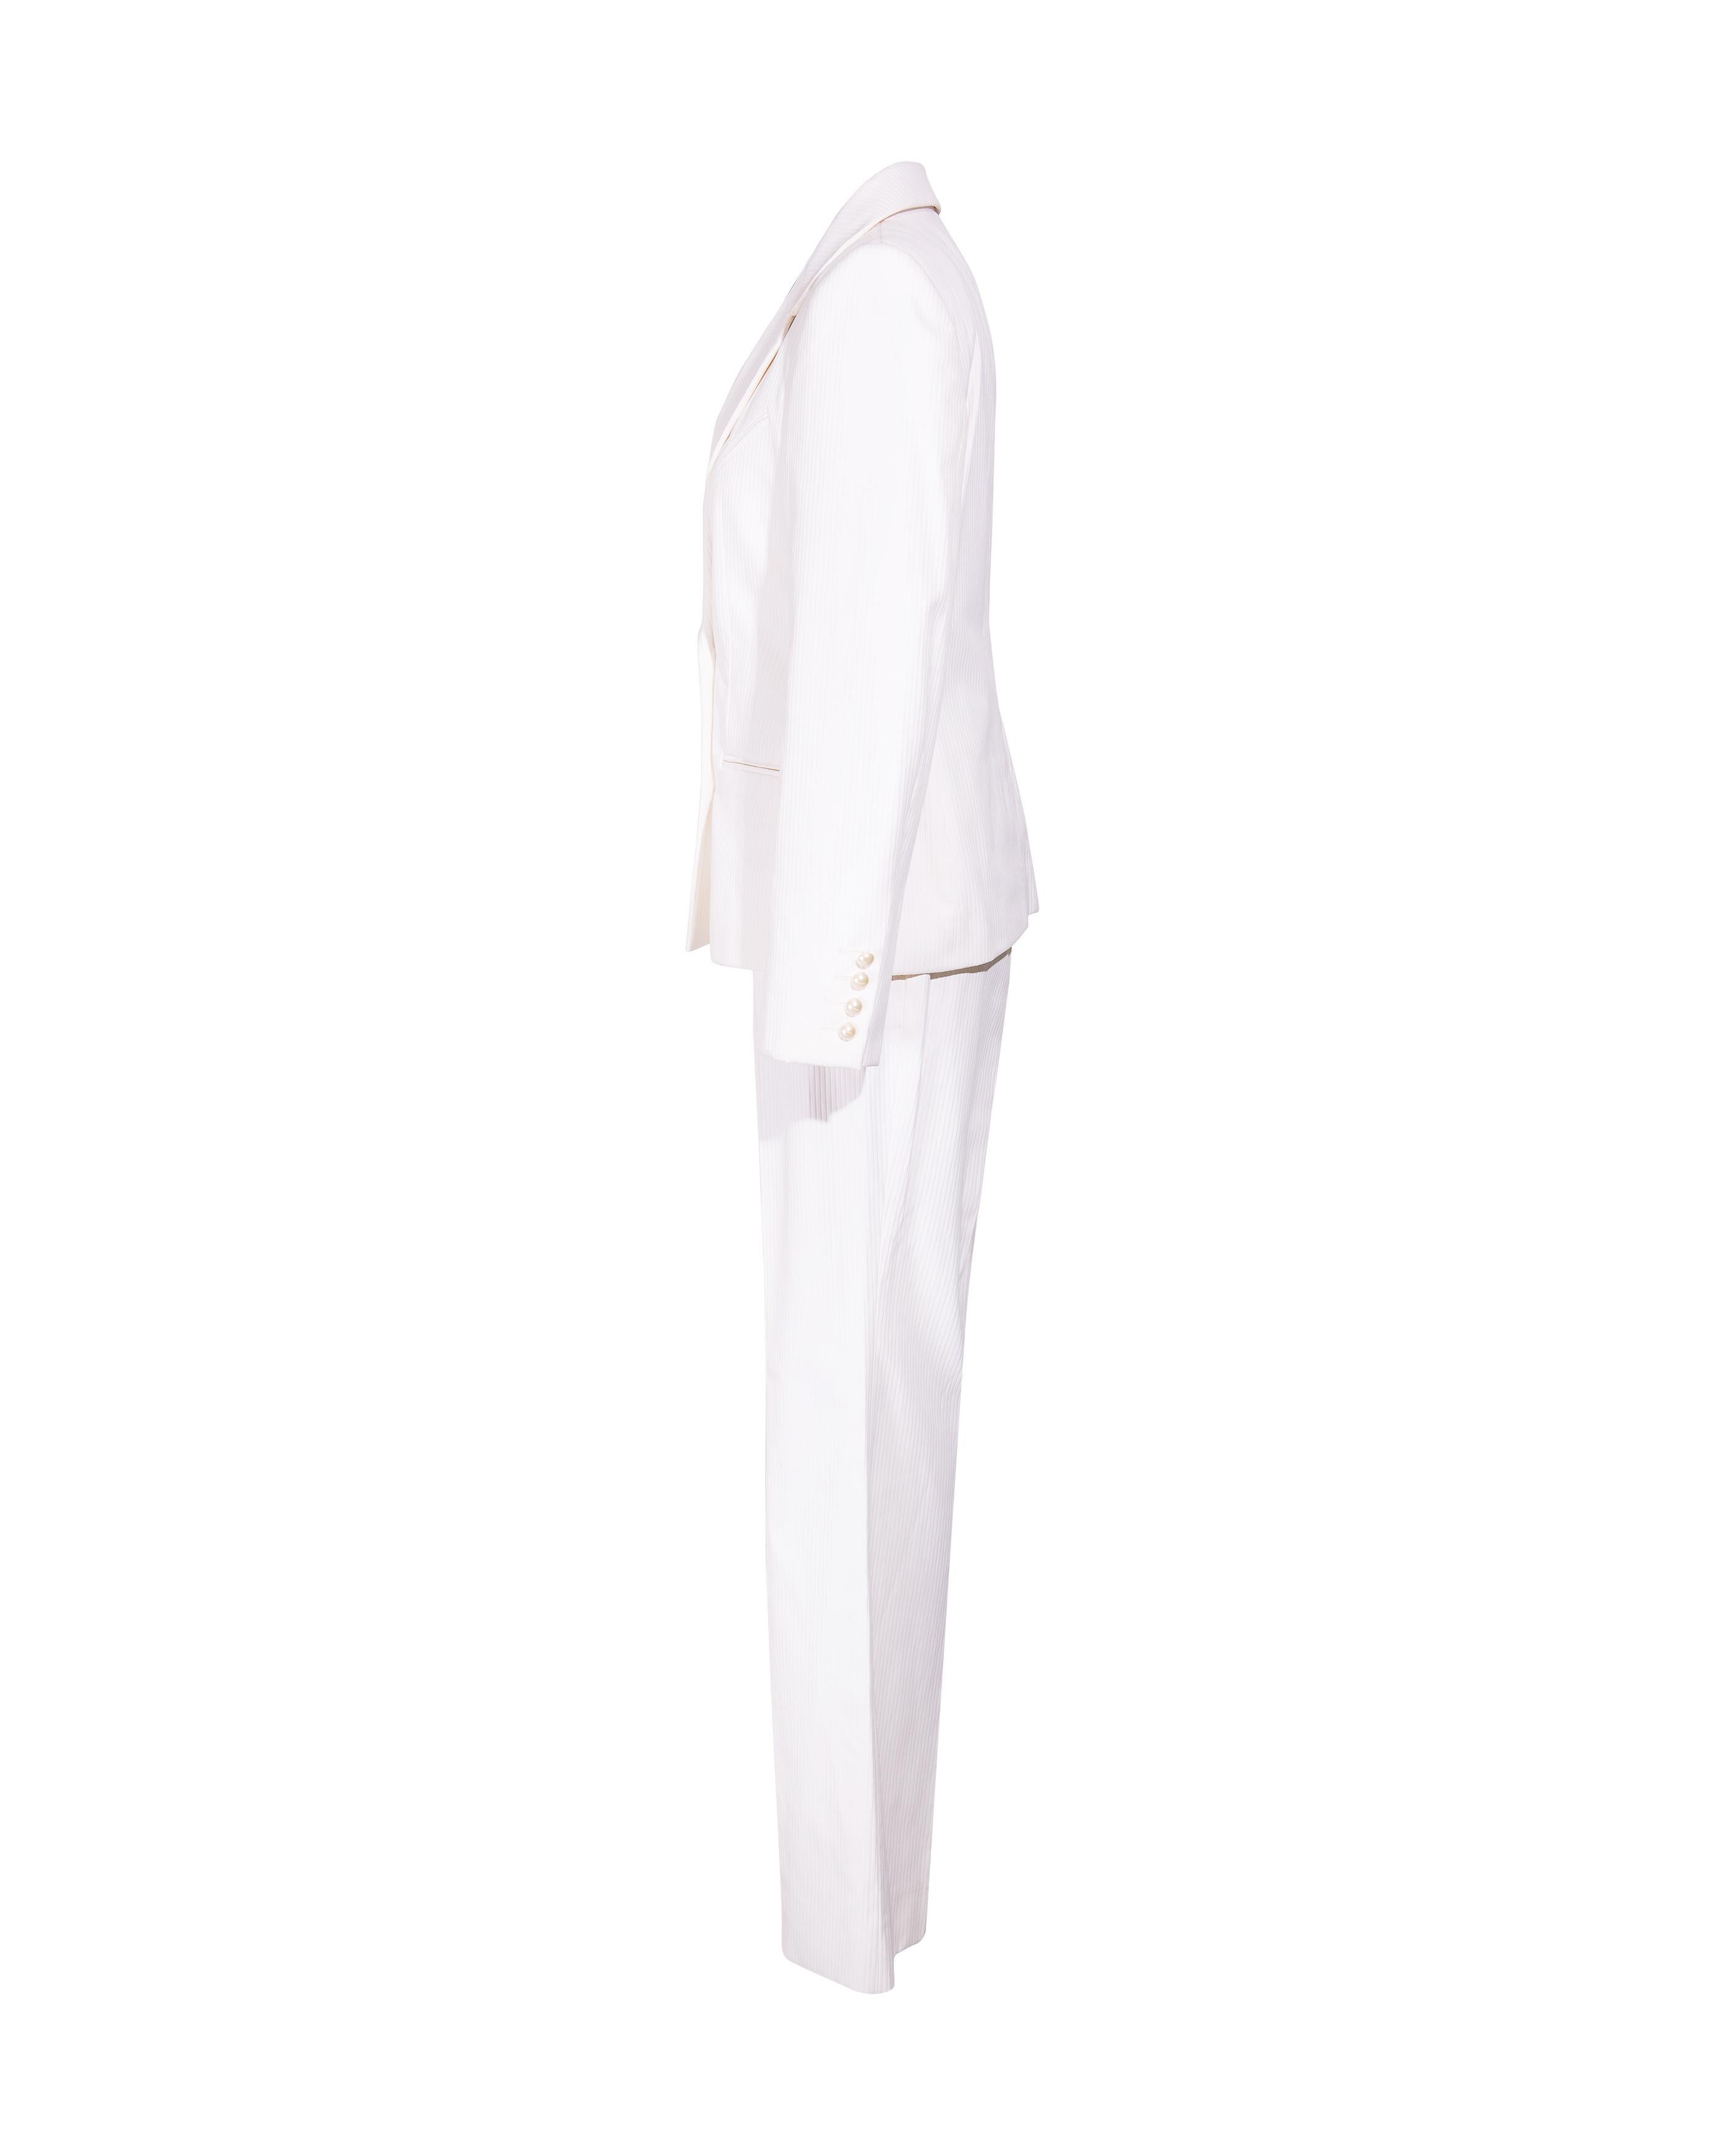 S/S 2001 Chanel Double-Breasted White Suit Set 3